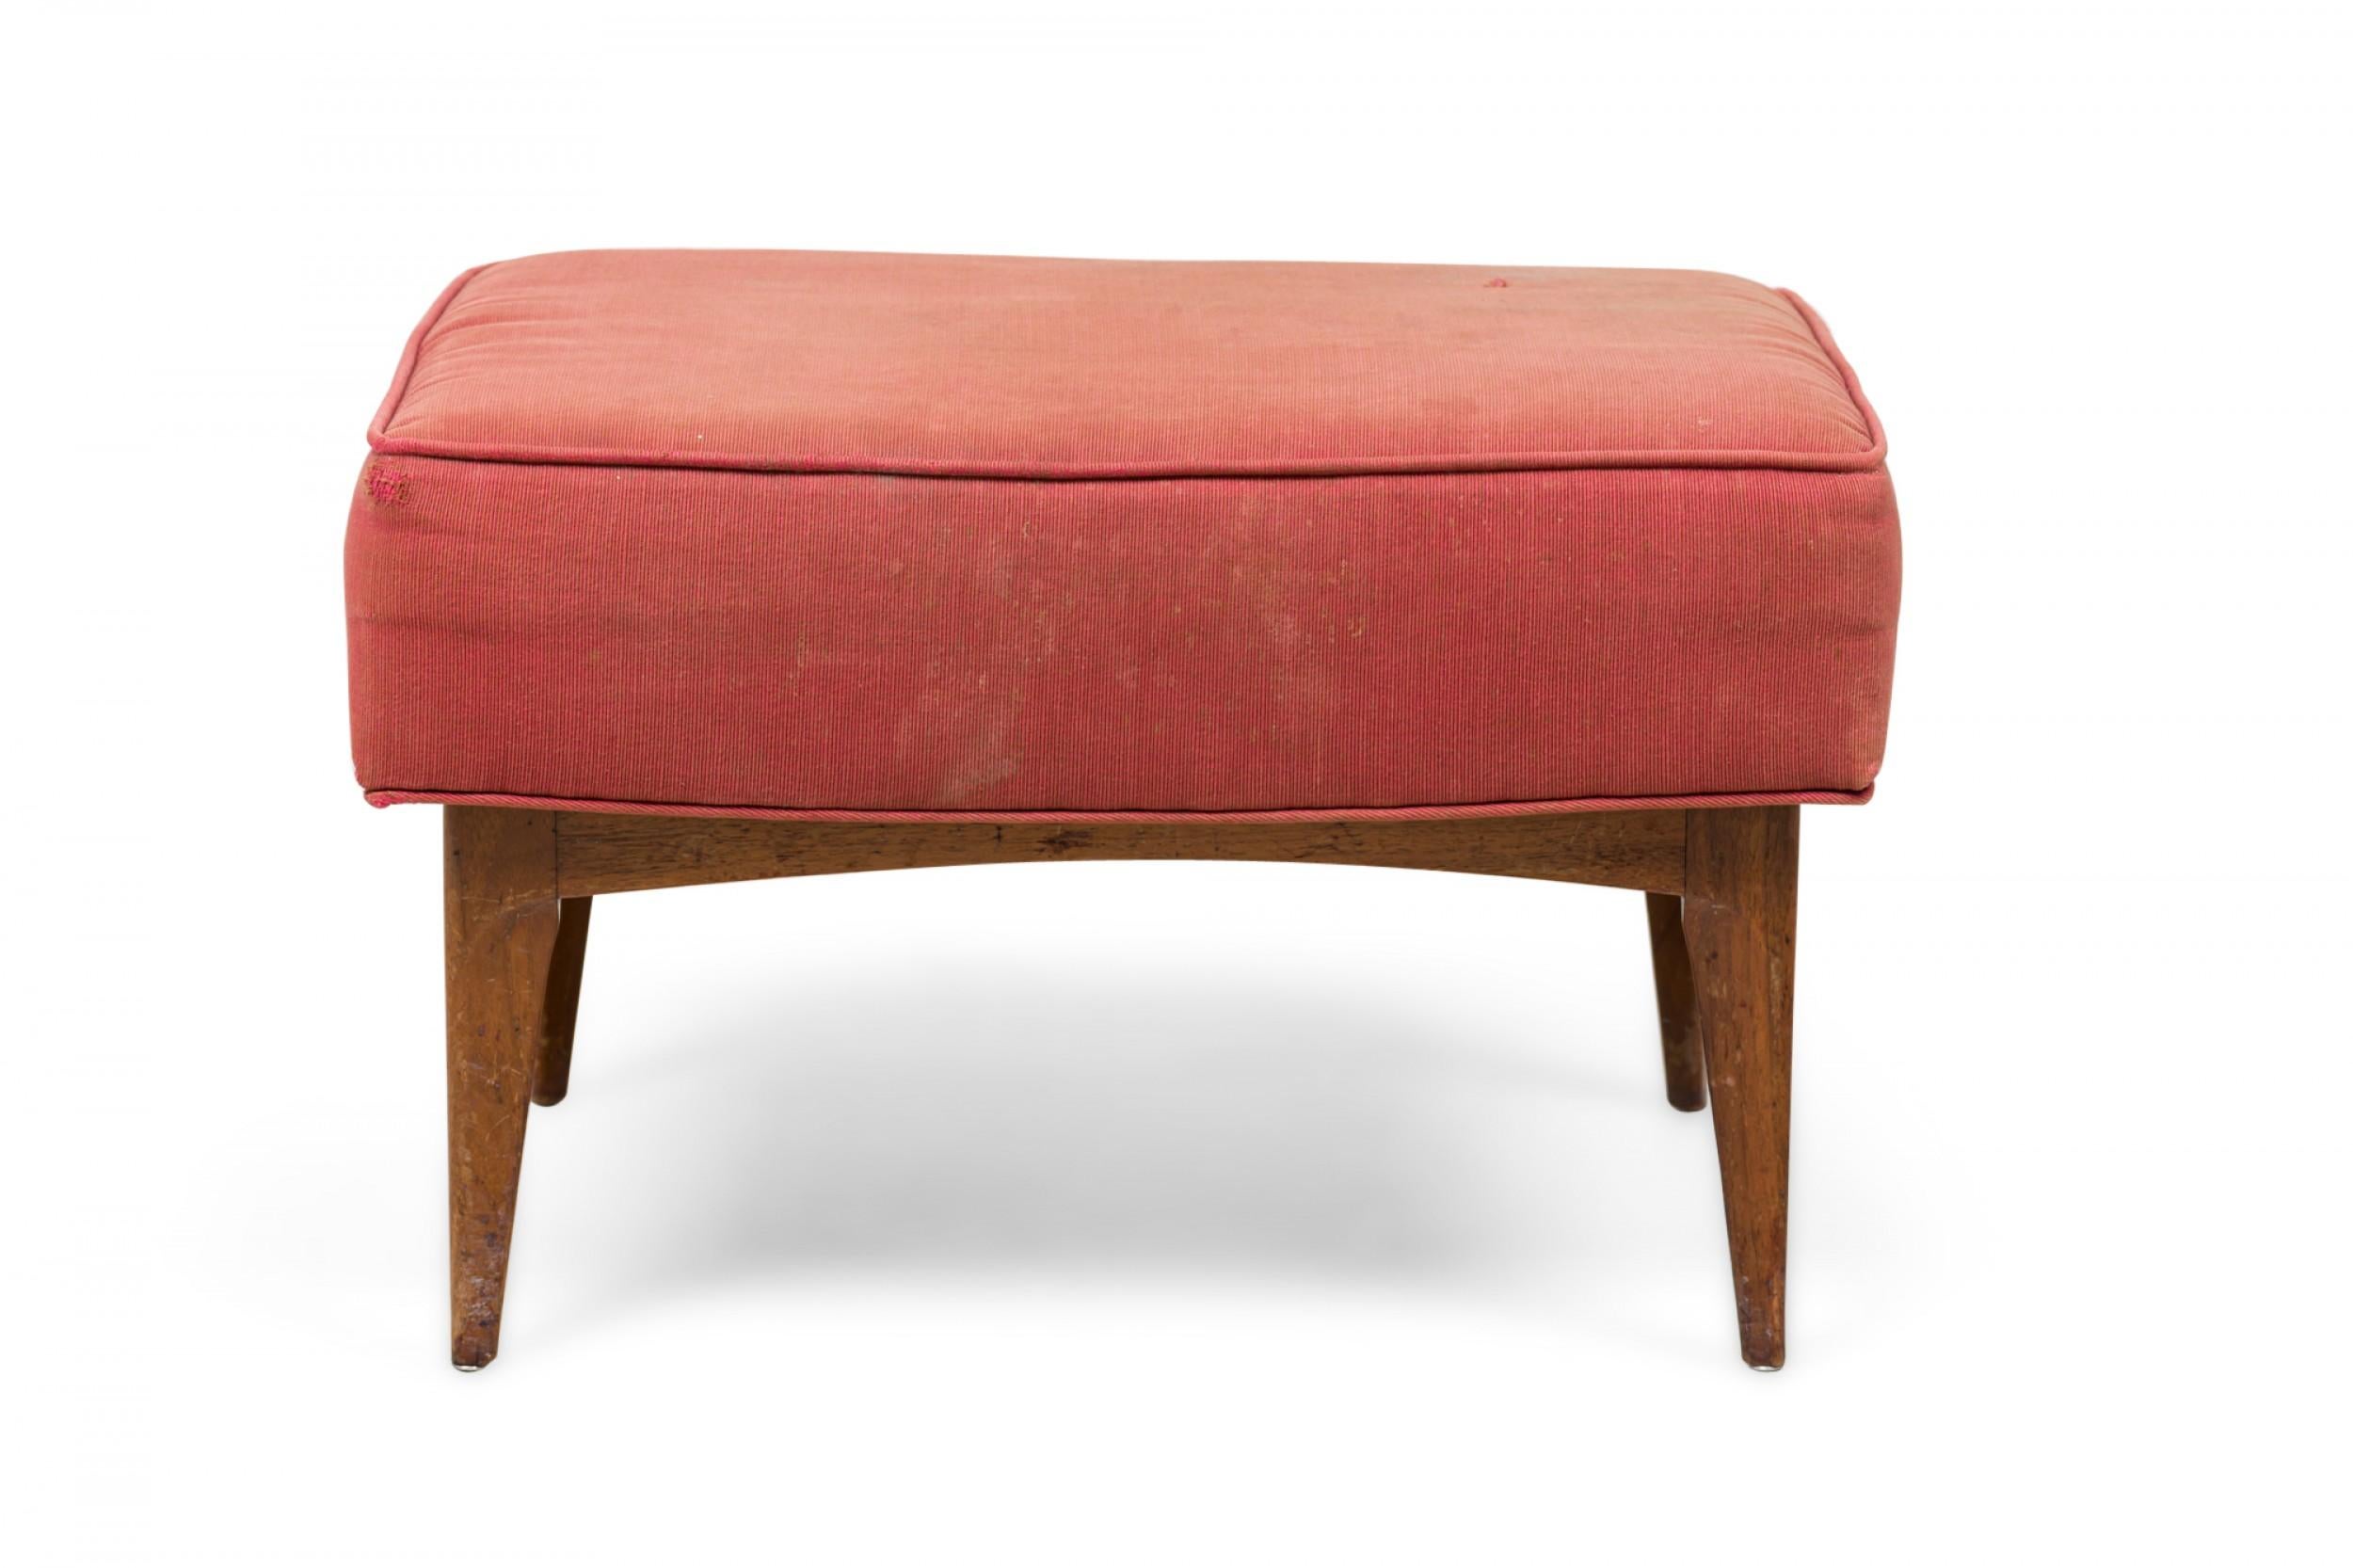 Midcentury Italian Walnut Red Upholstered Ottoman In Good Condition For Sale In New York, NY